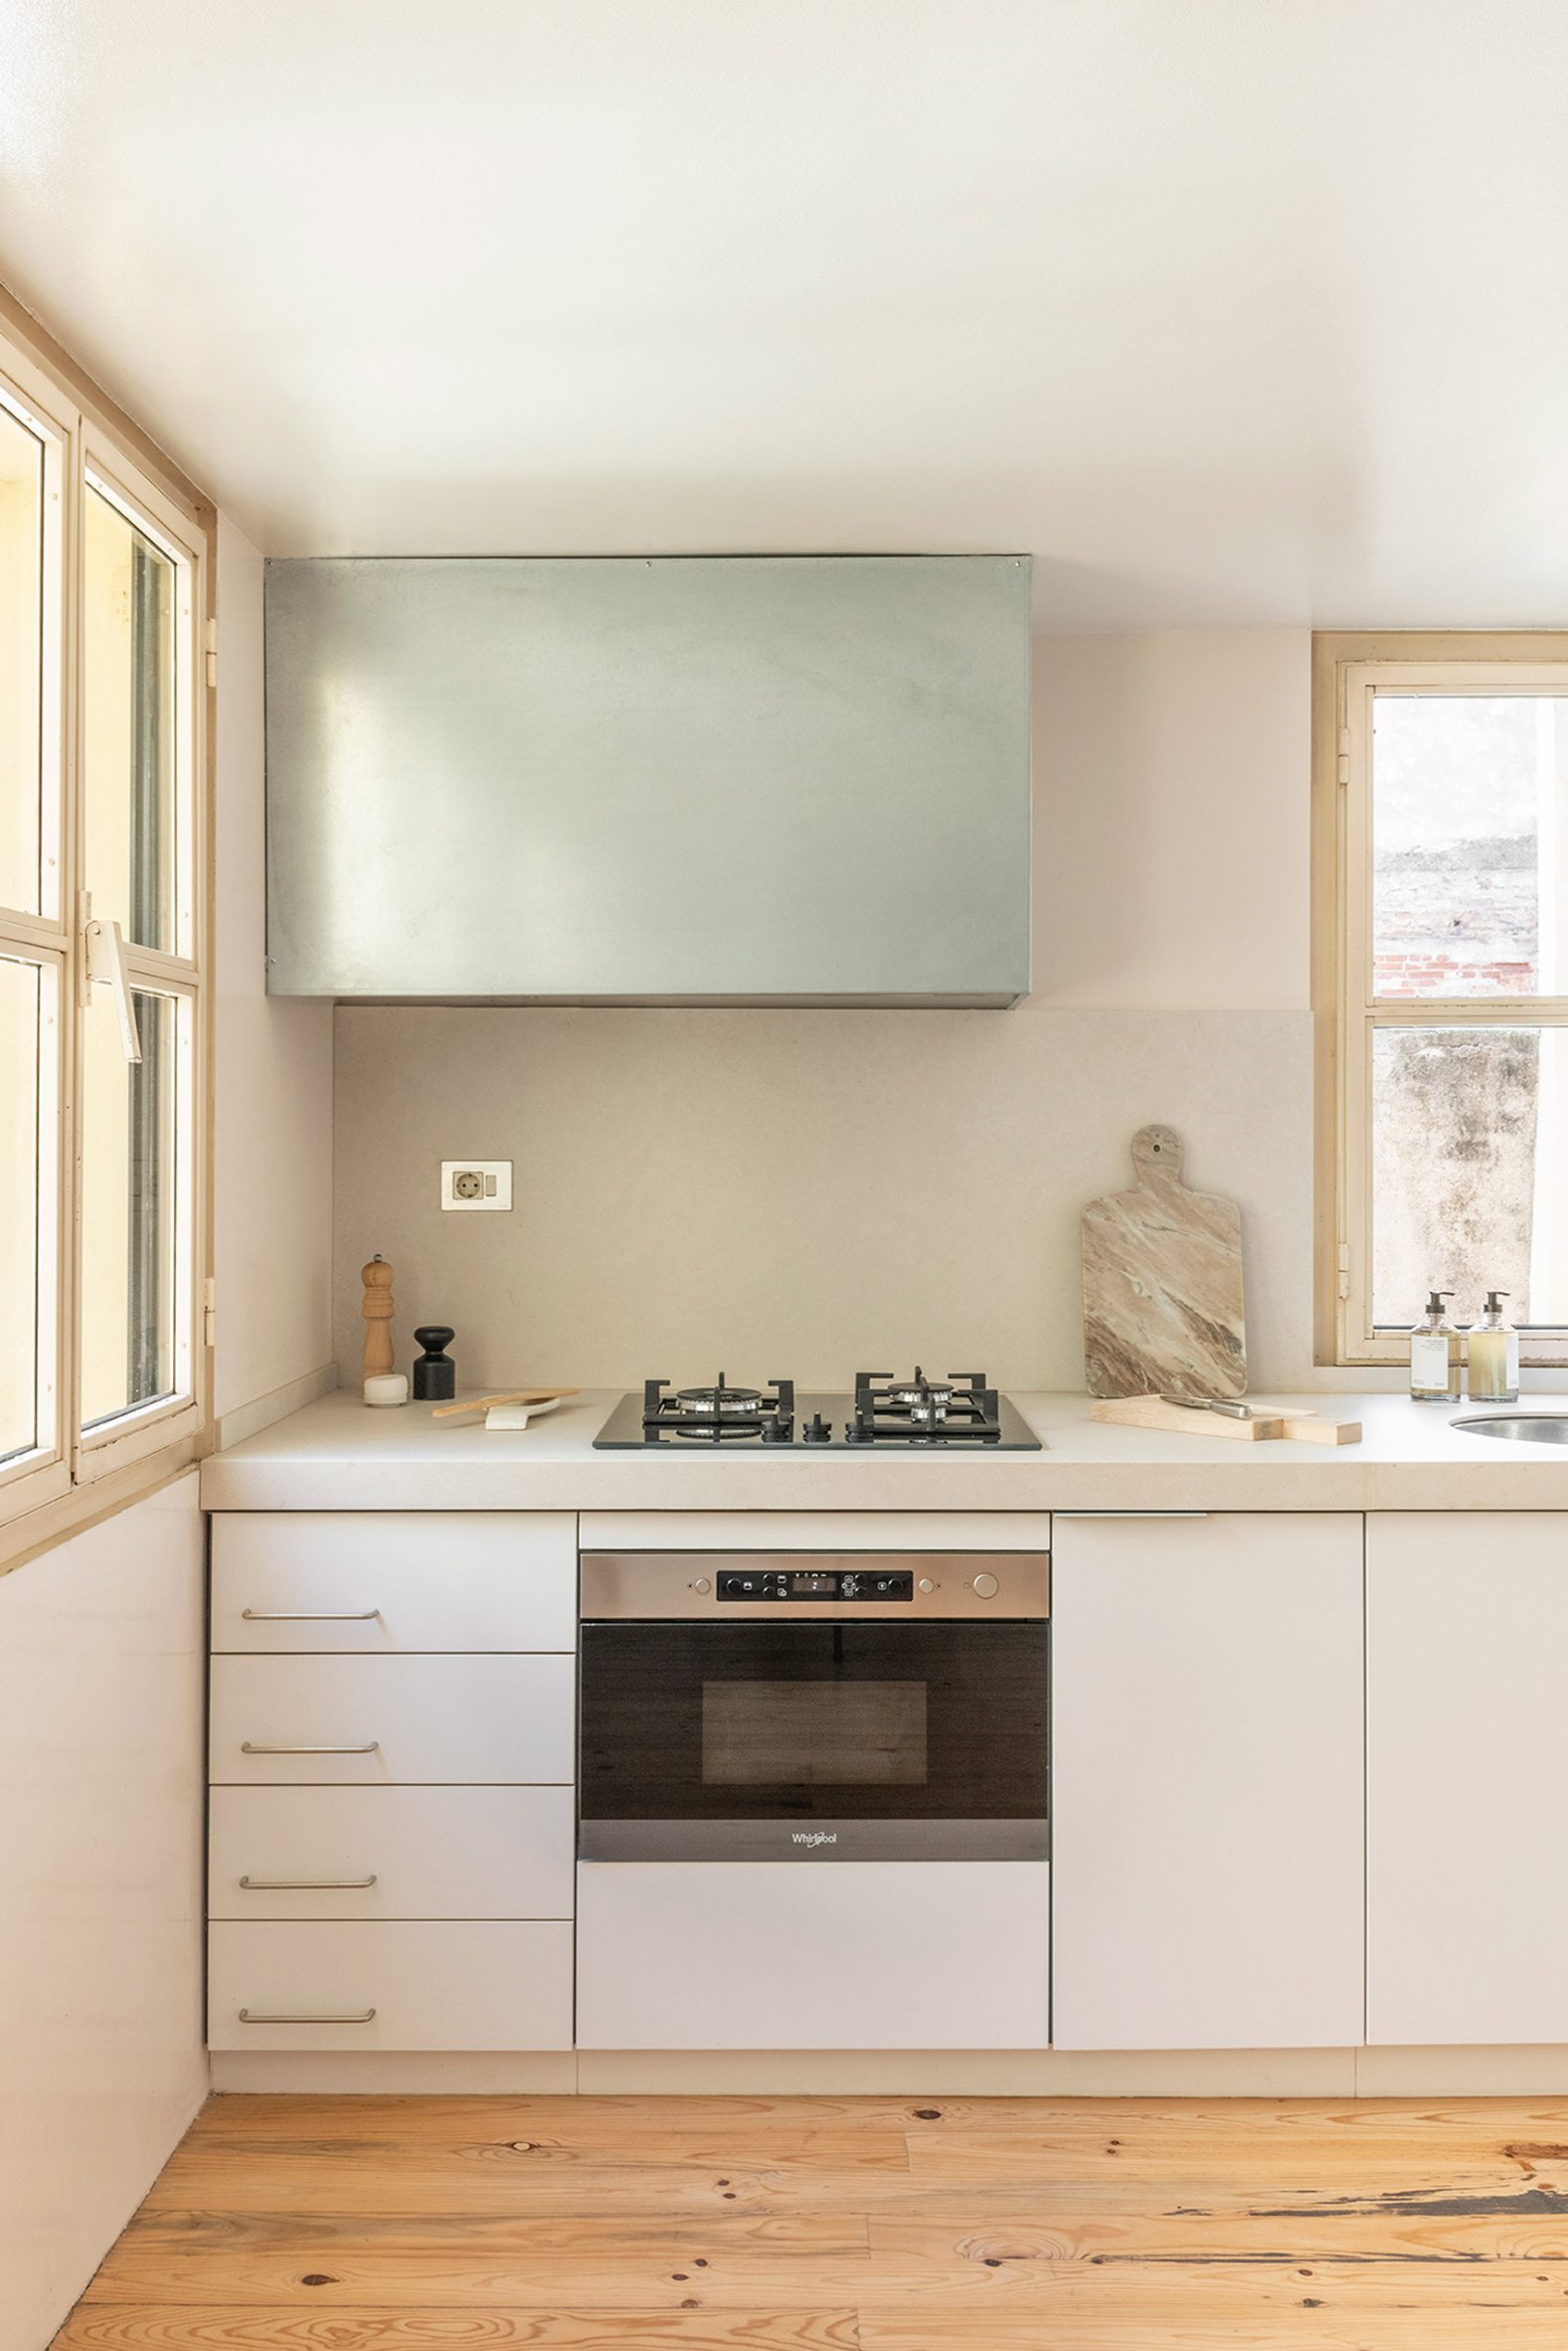 Kitchen interior of Colombo and Serboli Architecture flat